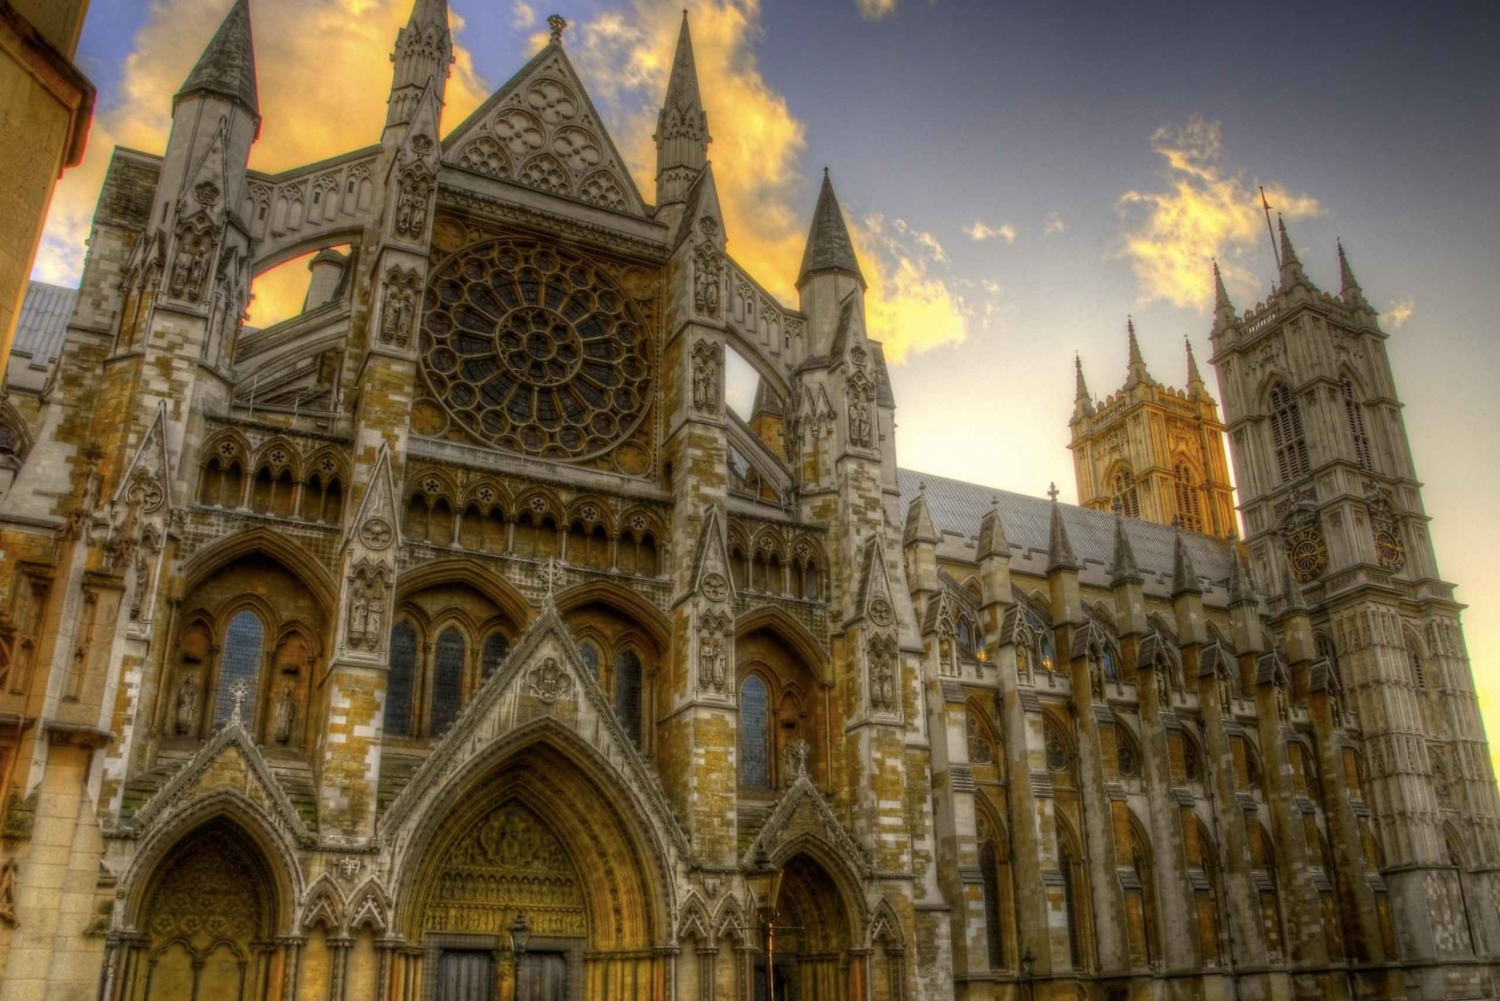 London: Westminster Walking Tour & Westminster Abbey Visit